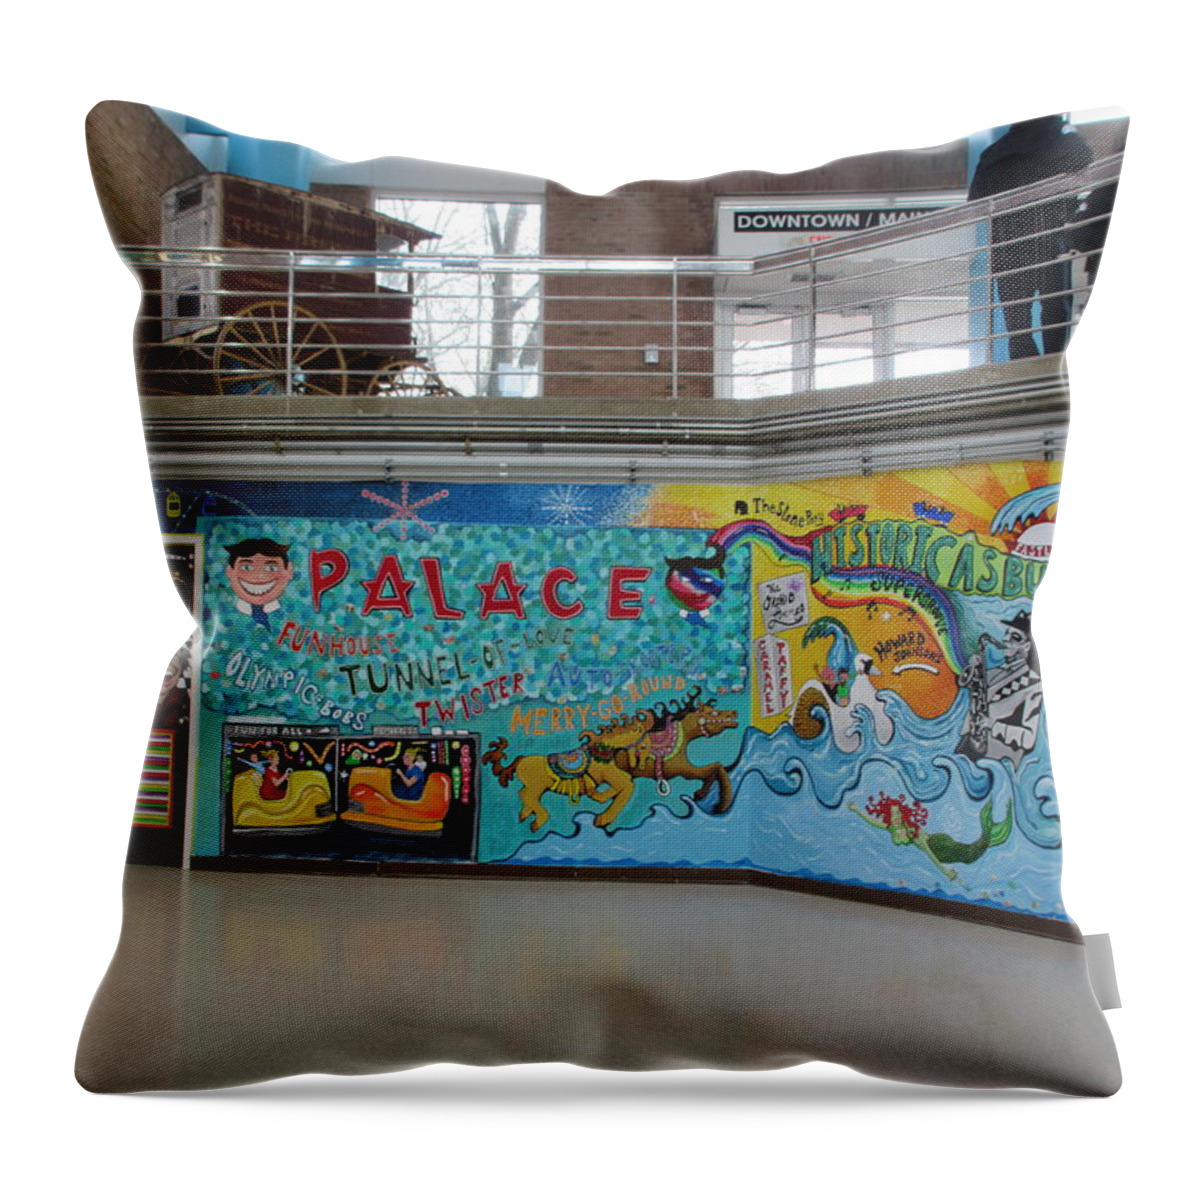 Asbury Park Throw Pillow featuring the painting Asbury Park Tansportation Mural by Patricia Arroyo